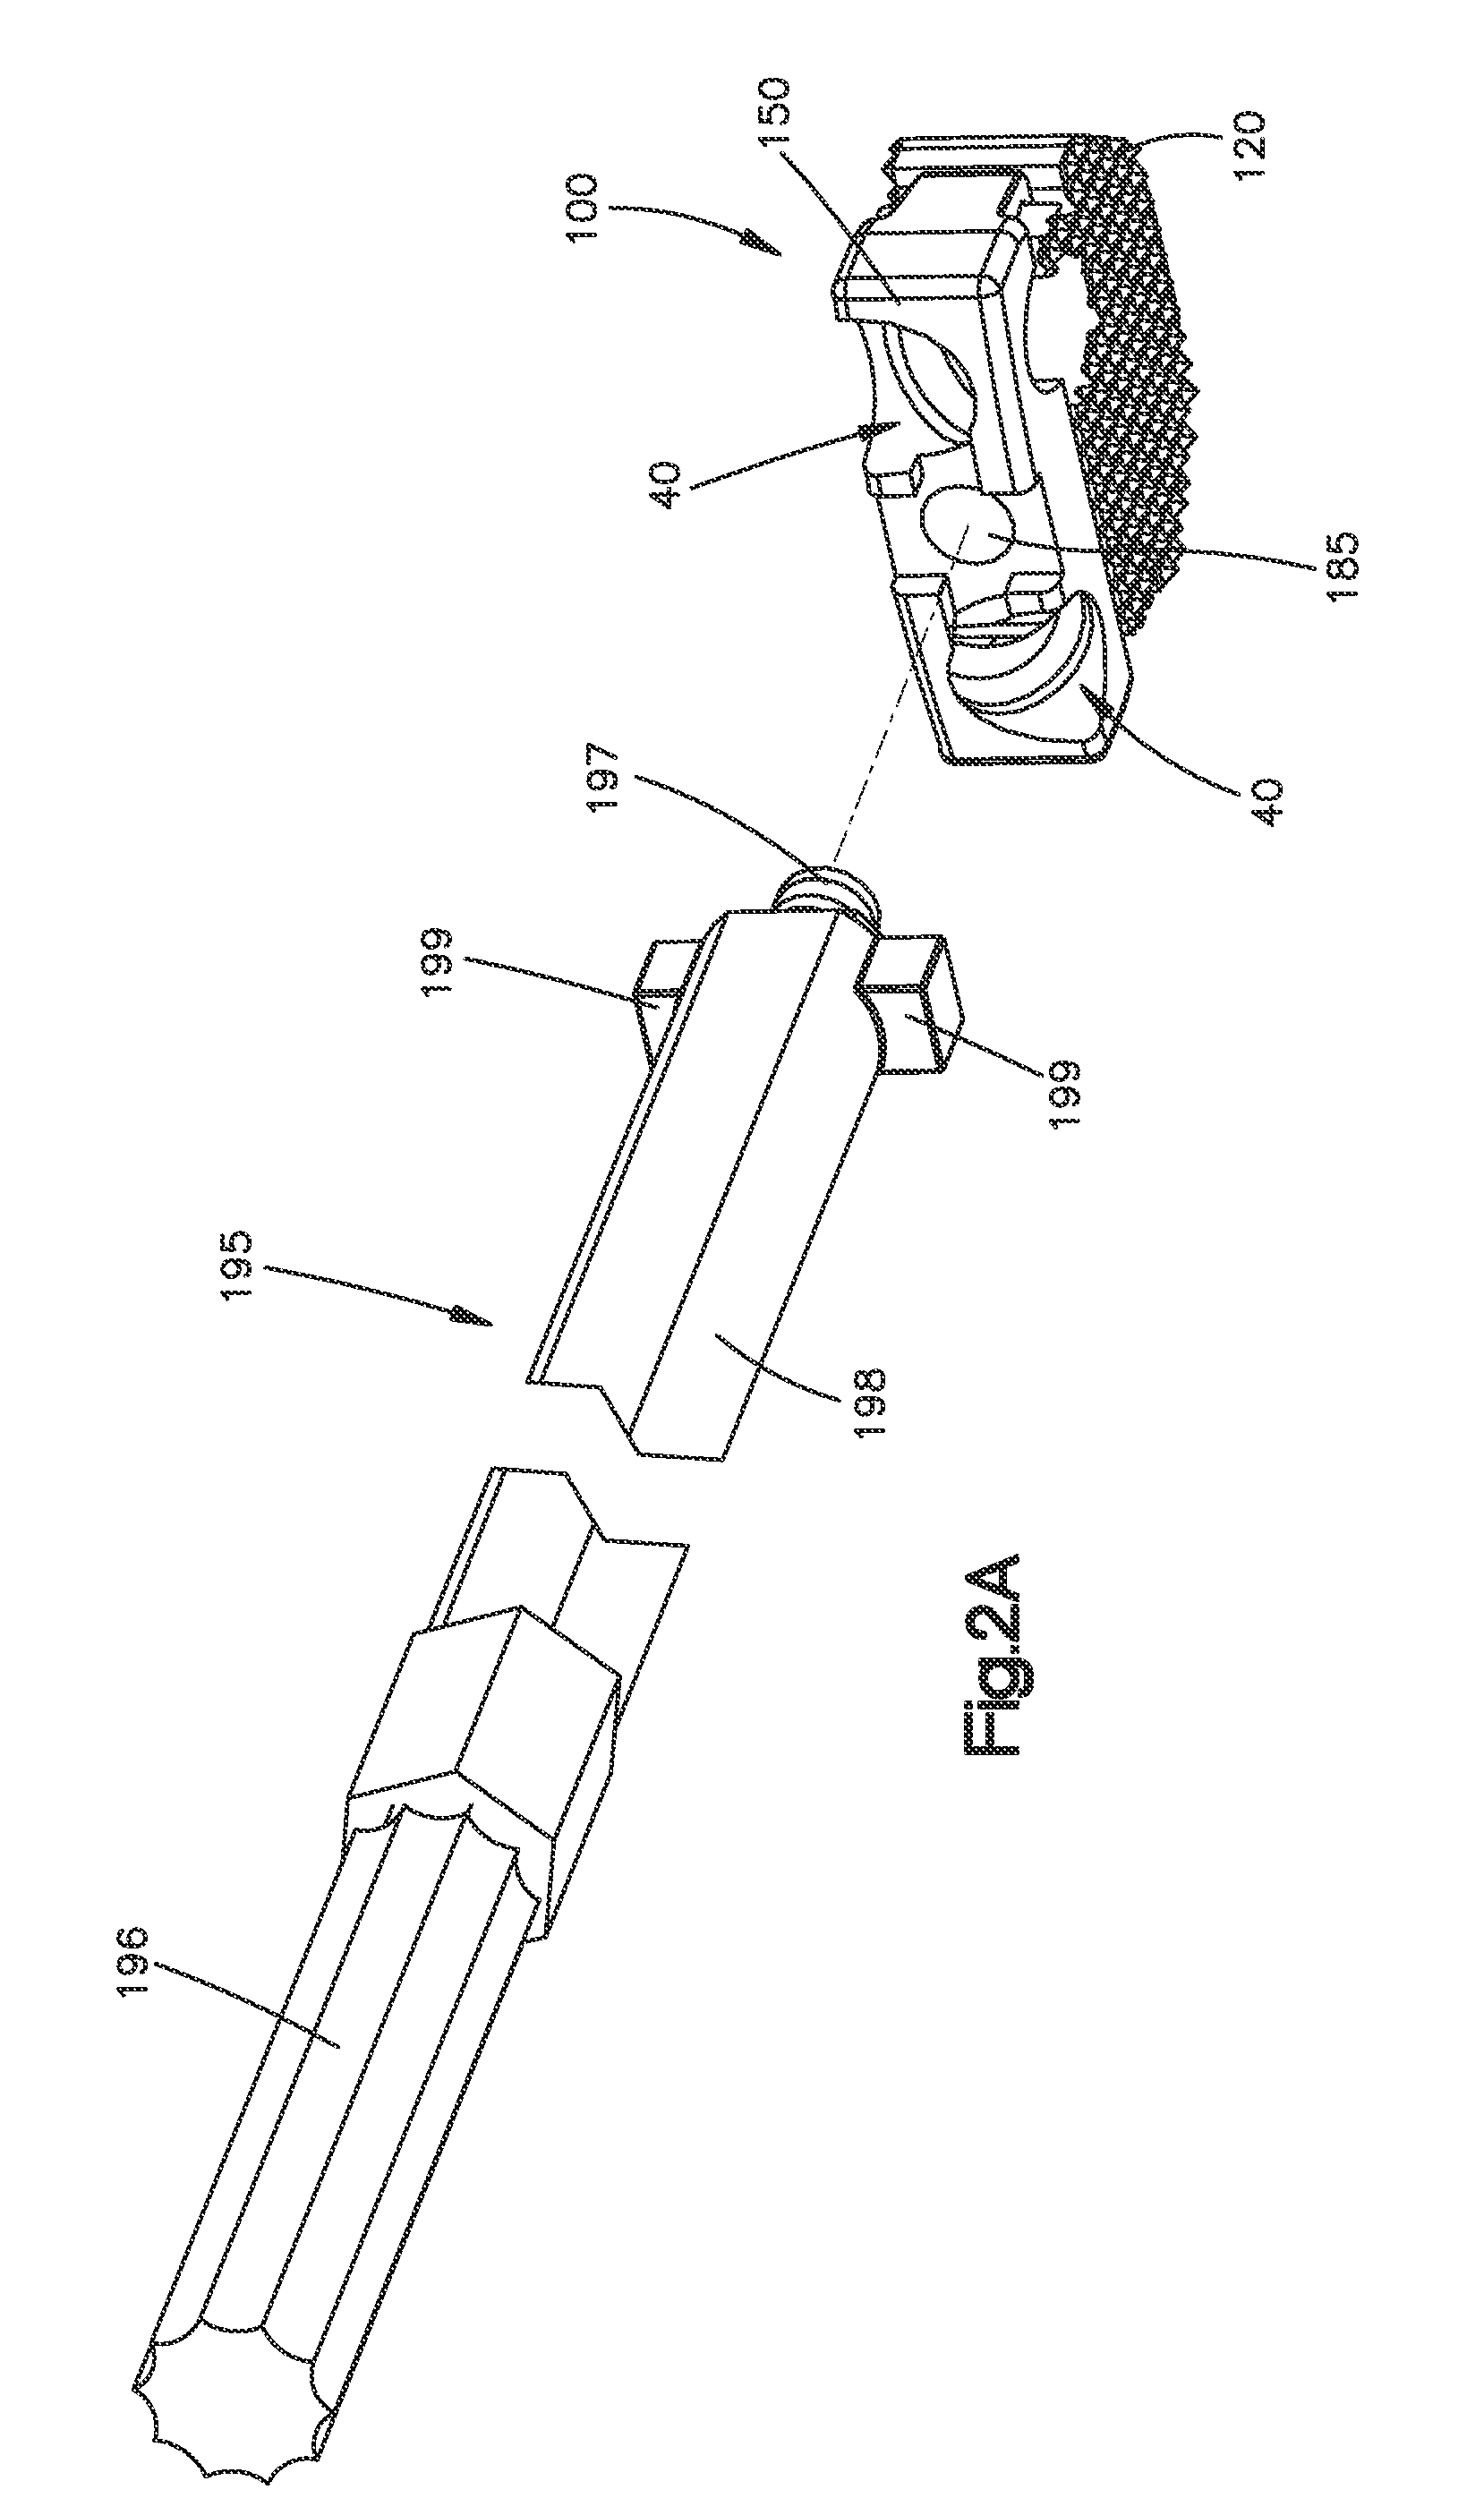 Zero-Profile Interbody Spacer and Coupled Plate Assembly